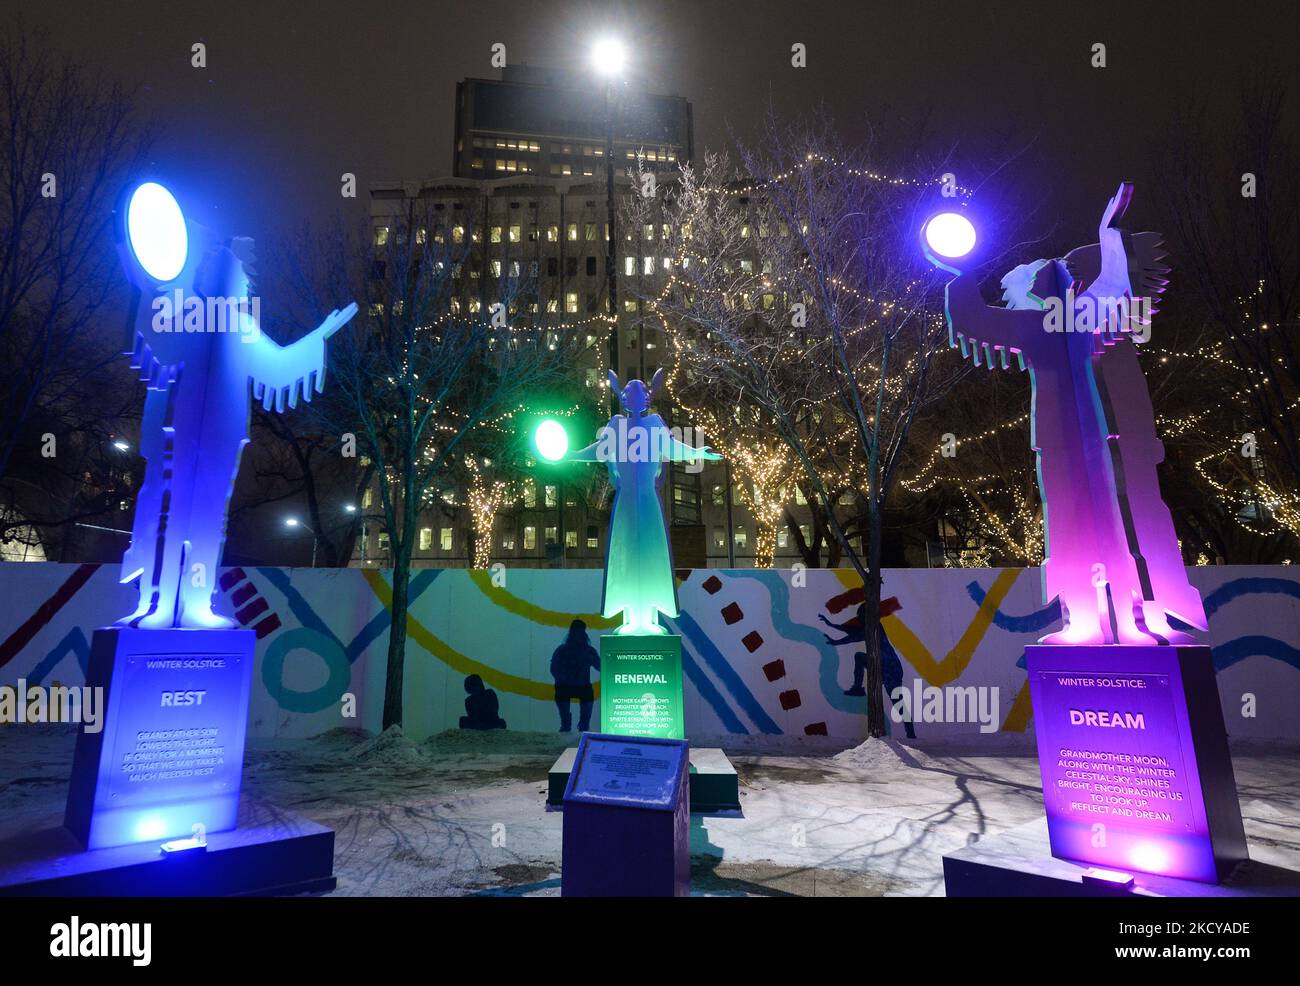 A stunning 'Winter Solstice' art installation by Edmonton-based Cree artist Jason Carter lights up Churchill Square in Edmonton to celebrate the longest and darkest night of the year. The installation consists of three 16-foot sculptures depicting Grandfather Sun, Mother Earth and Grandma Moon, labeled 'Rest', 'Renewal' and 'Dreamed' respectively, each holding a ball of light. On Tuesday, 20 October 2021, in Edmonton, Alberta, Canada. (Photo by Artur Widak/NurPhoto) Stock Photo